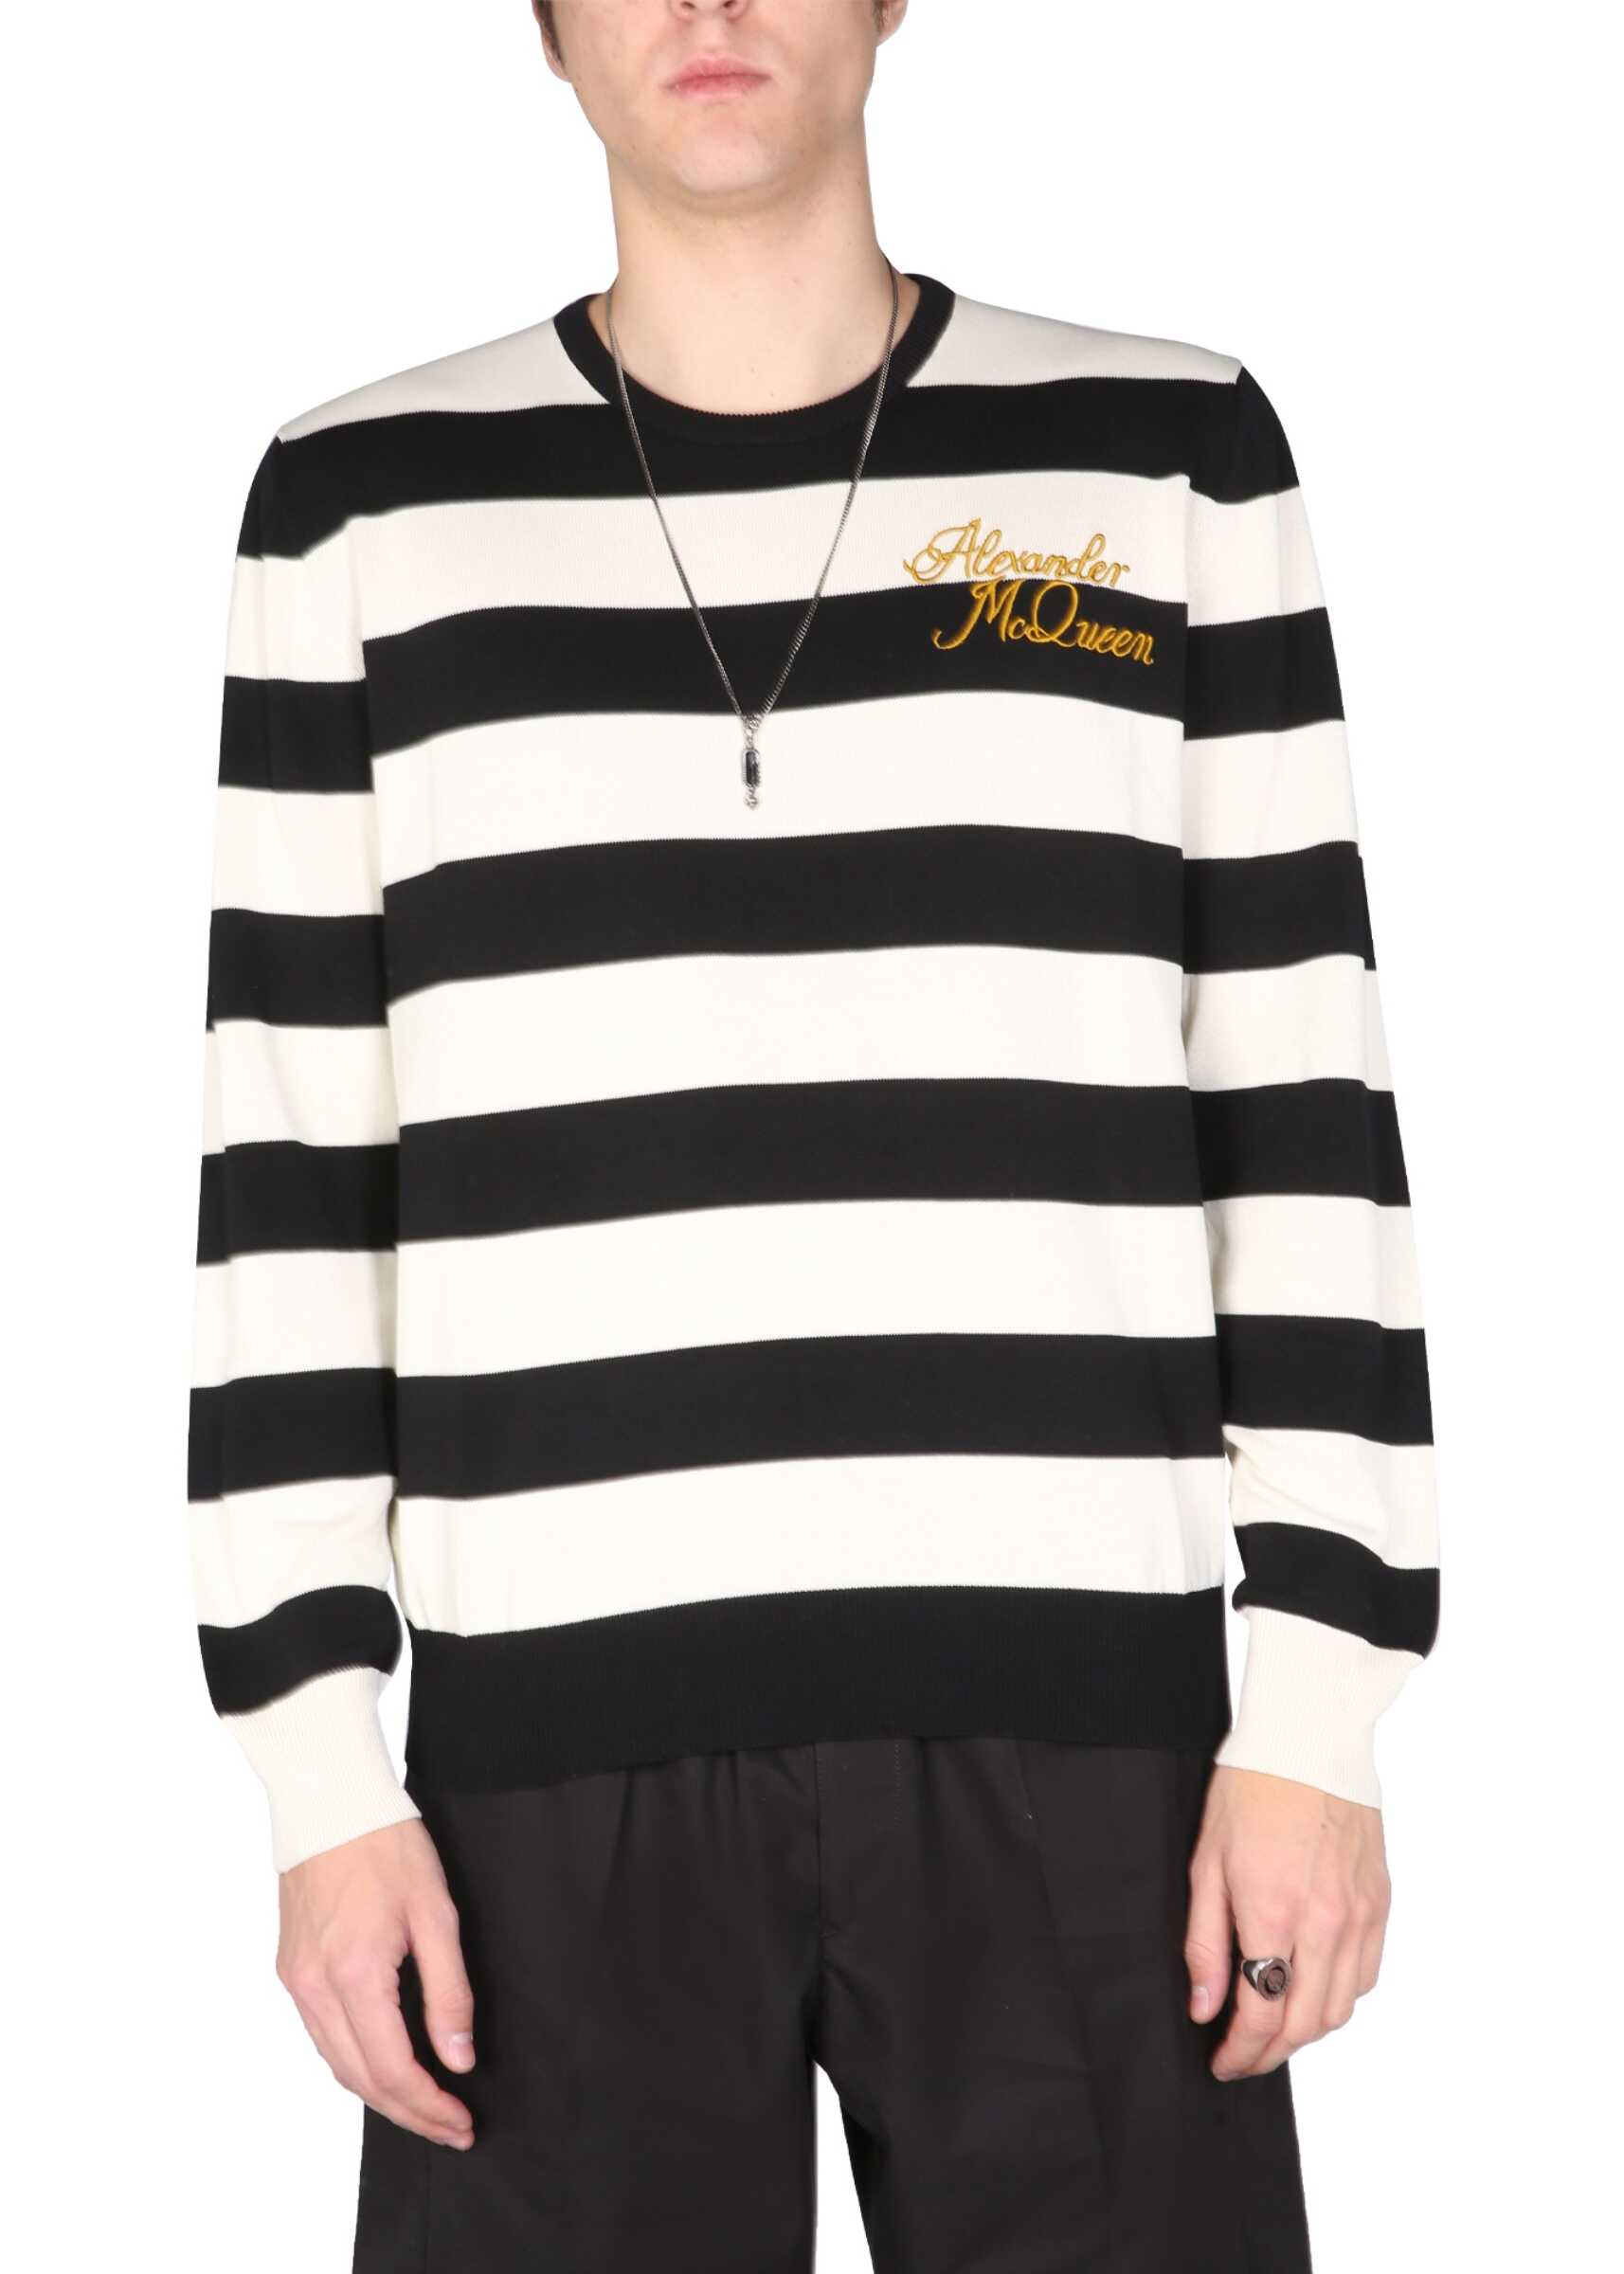 Alexander McQueen Sweater With Embroidered Logo 689561_Q1XDZ1037 MULTICOLOUR image